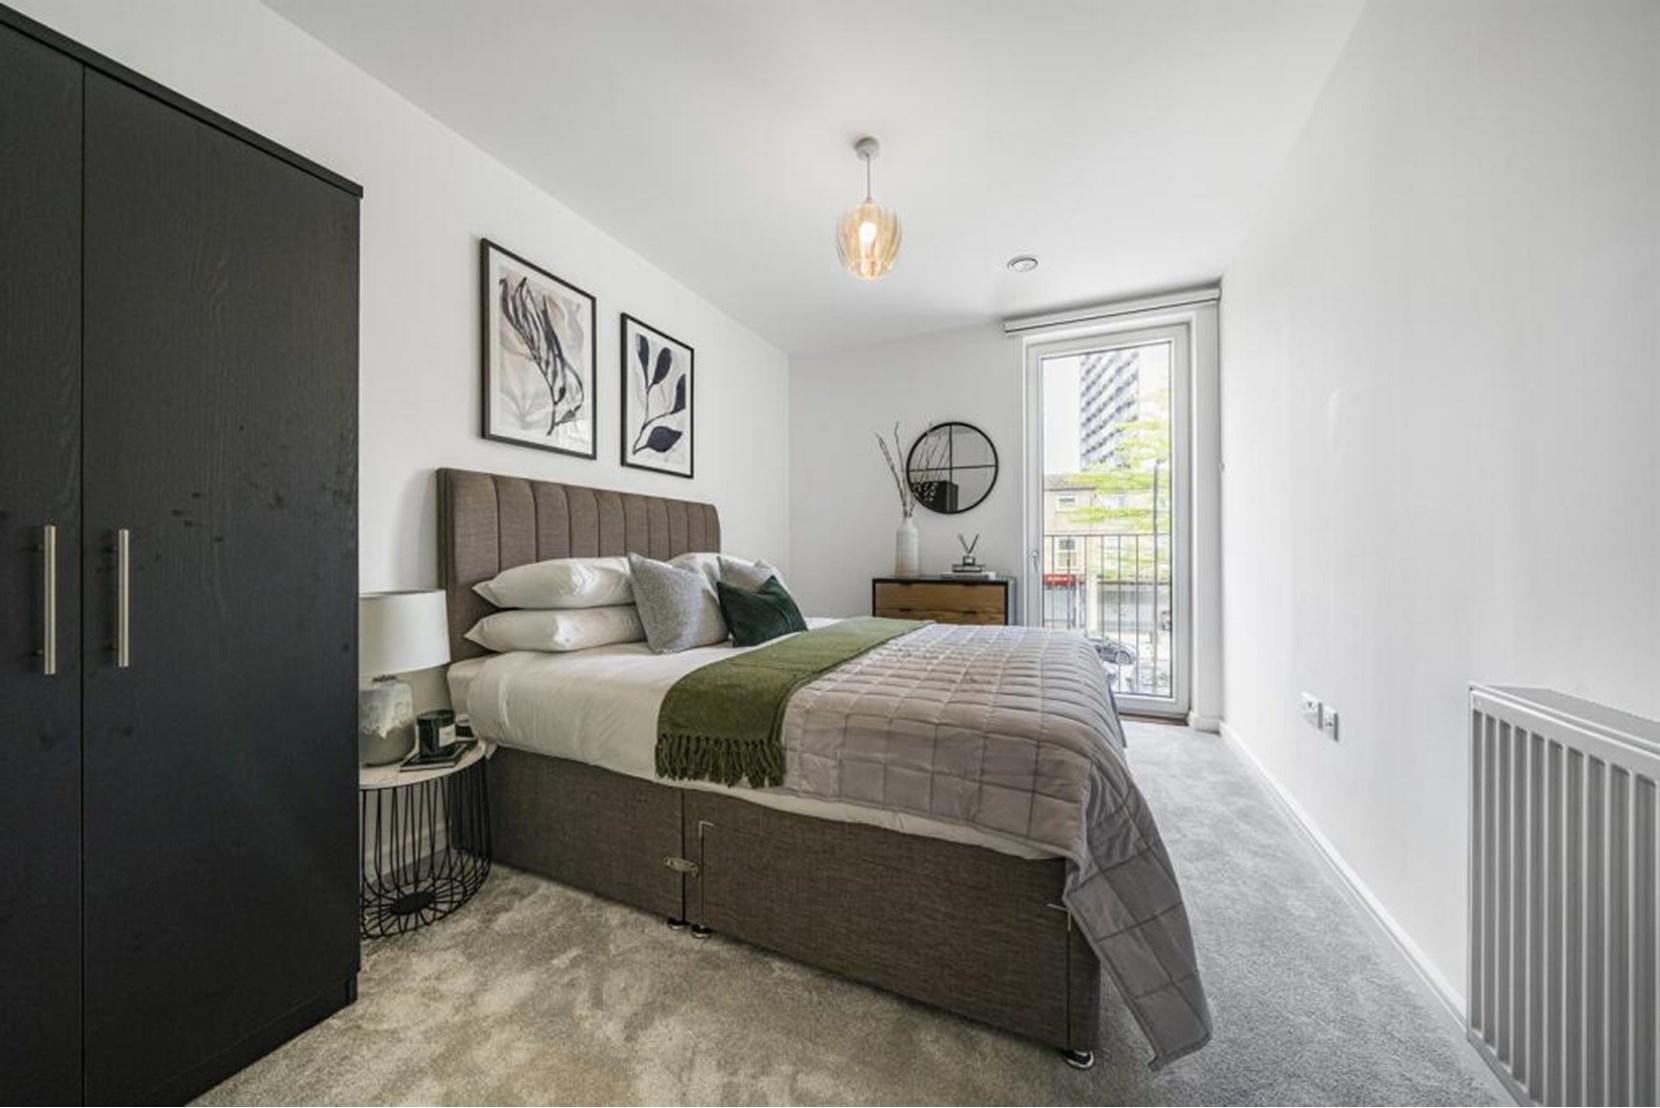 Apartments to Rent by Simple Life London in Elements, Enfield, EN3, The Mercury bedroom